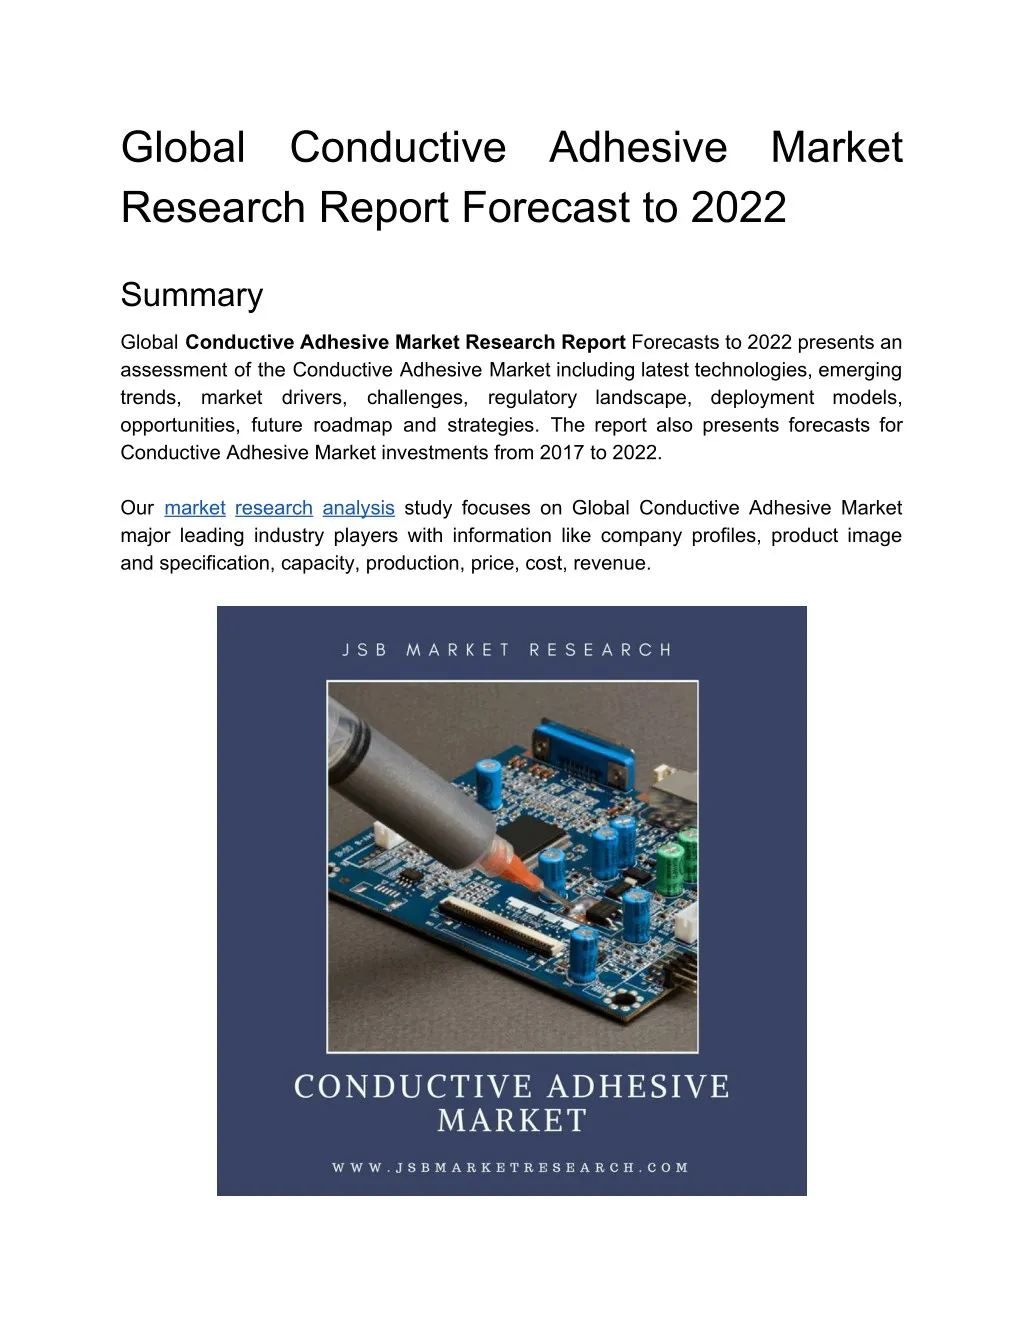 global research report forecast to 2022